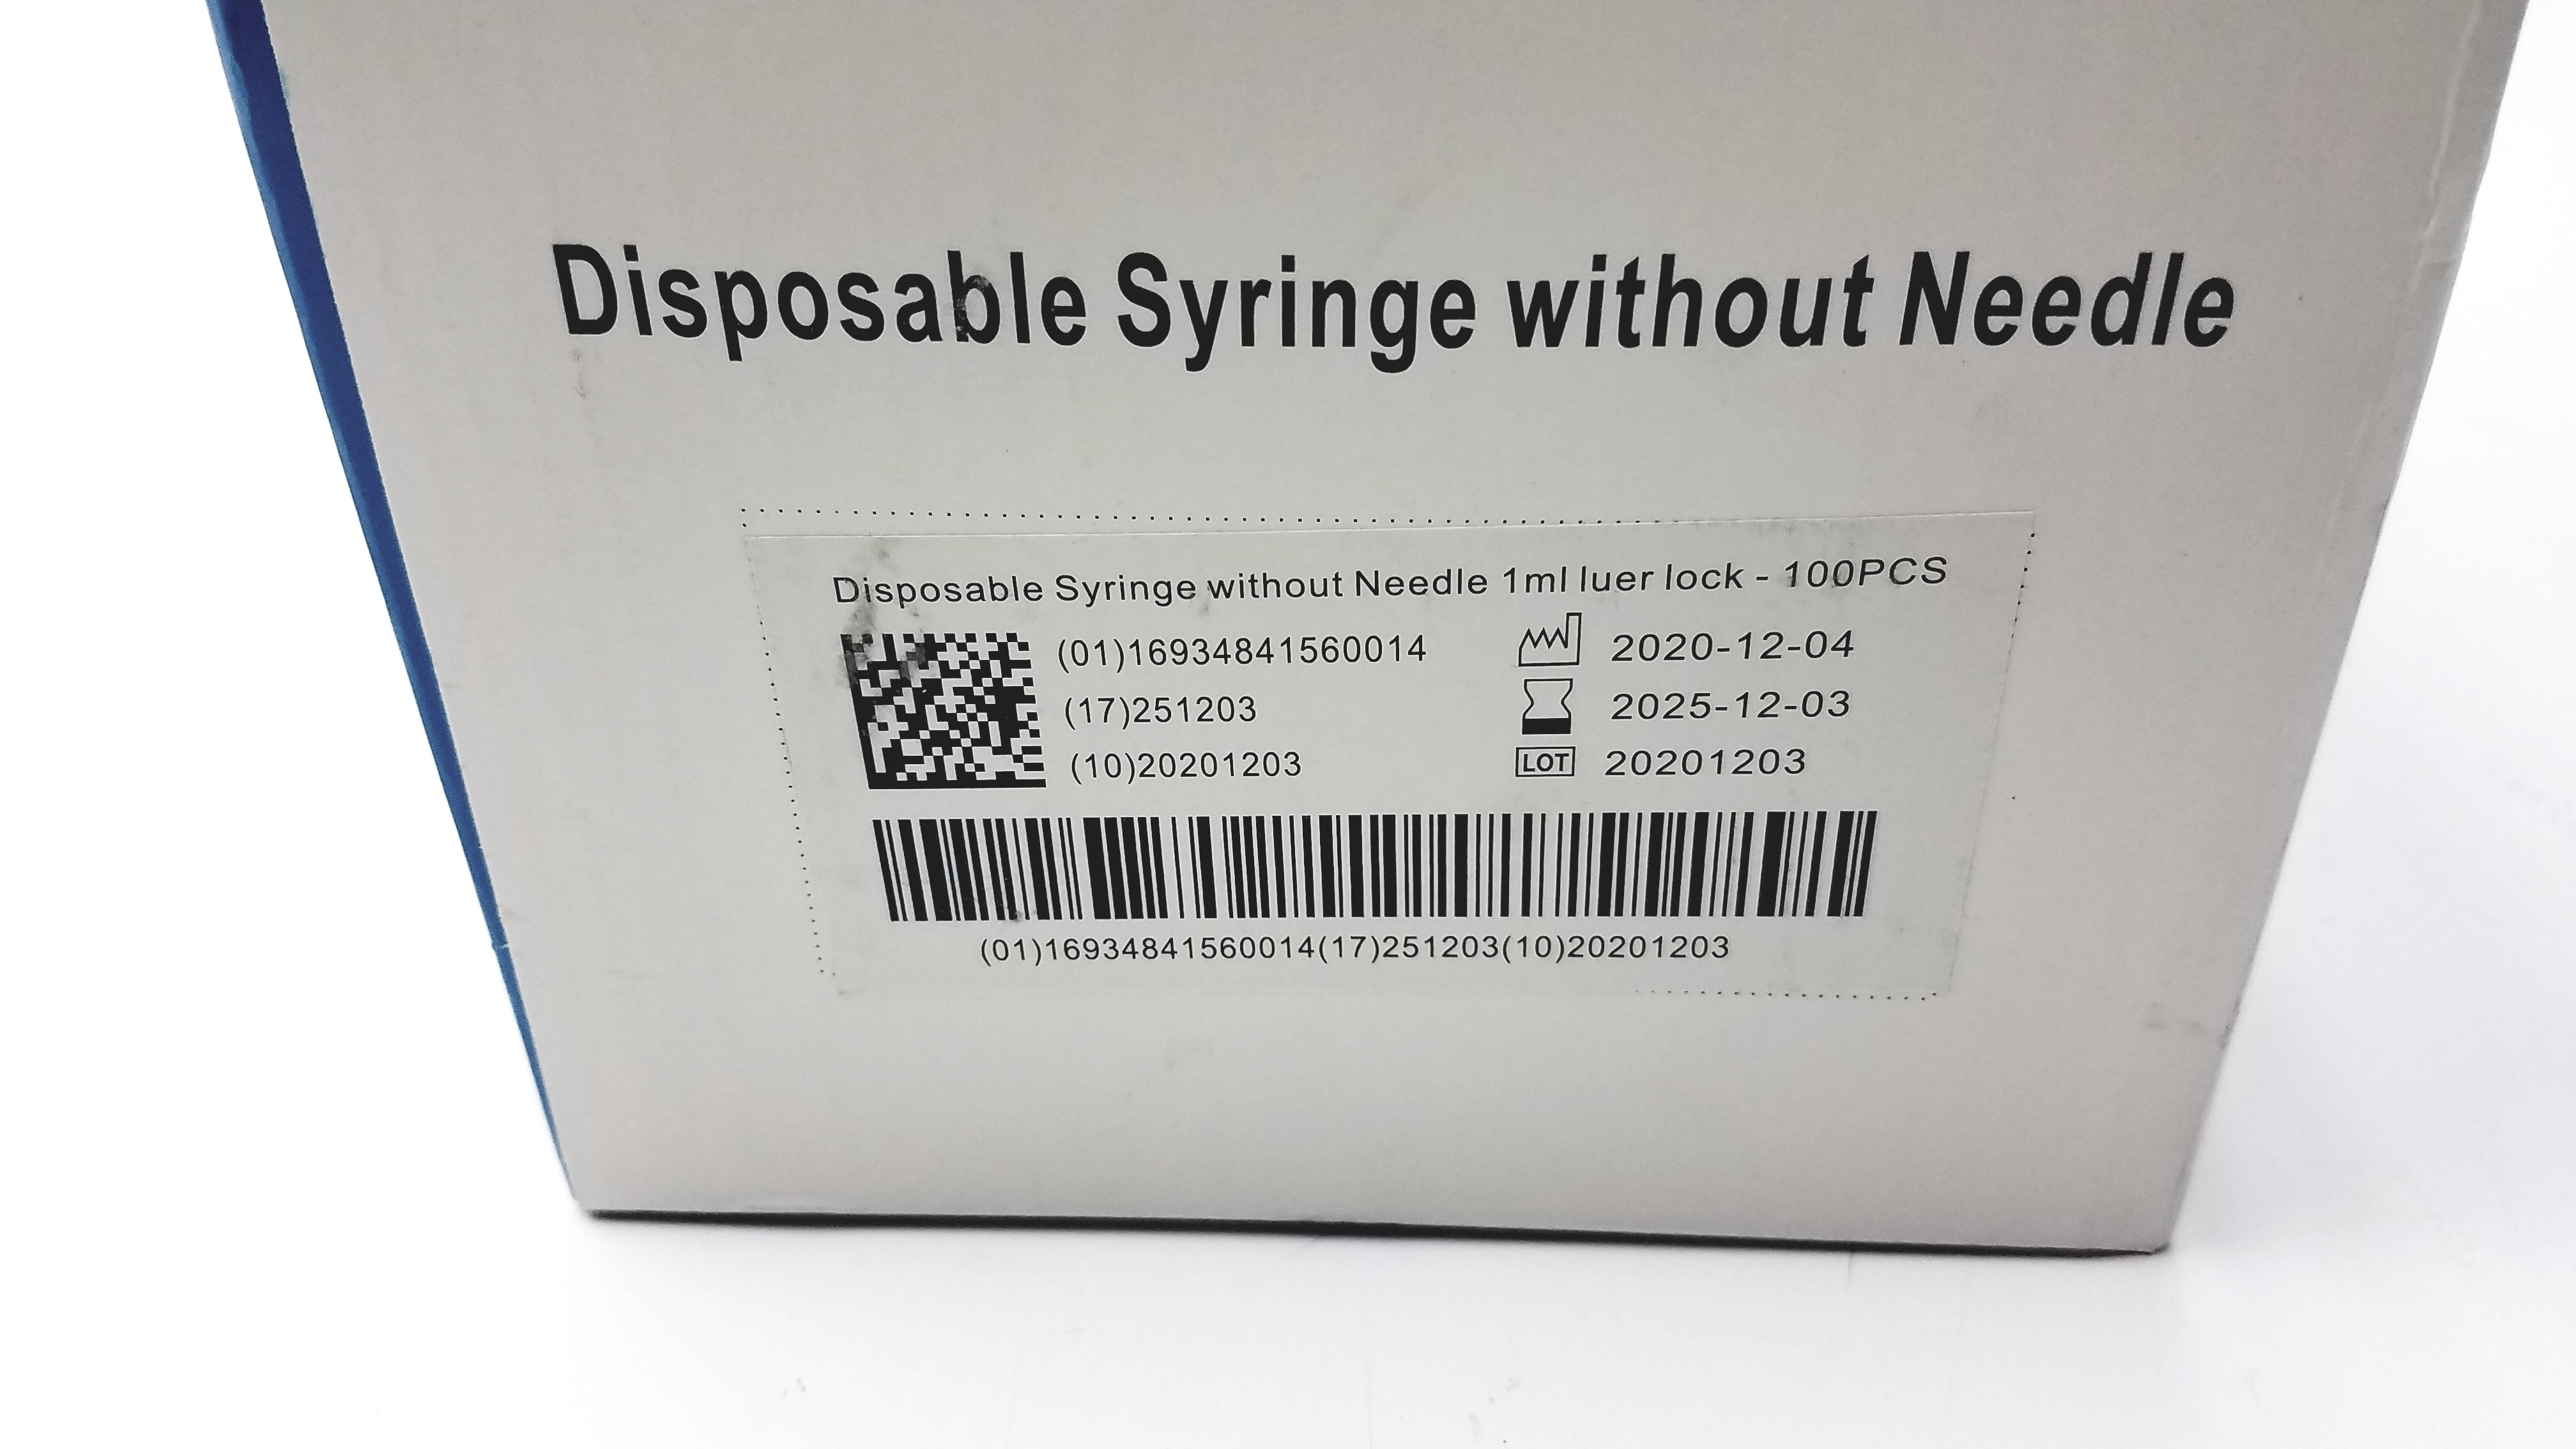 Load image into Gallery viewer, TKMD Disposable Syringe Without Needle 1cc/Ml 100pcs